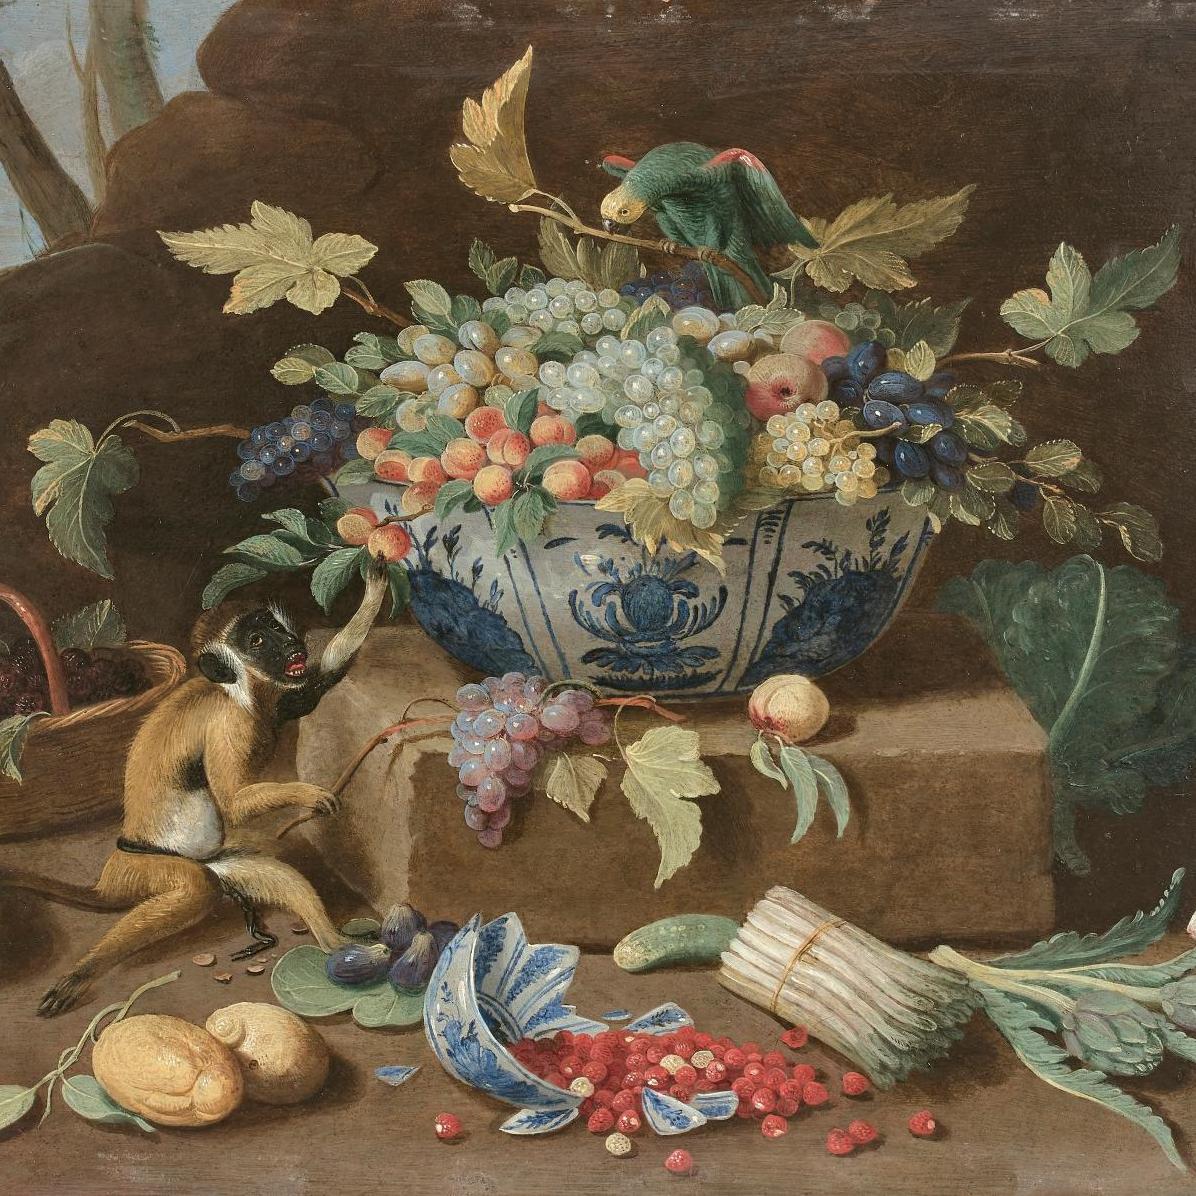 A Superlative Selection of “Oeuvres Choisies” at Drouot - Exhibitions